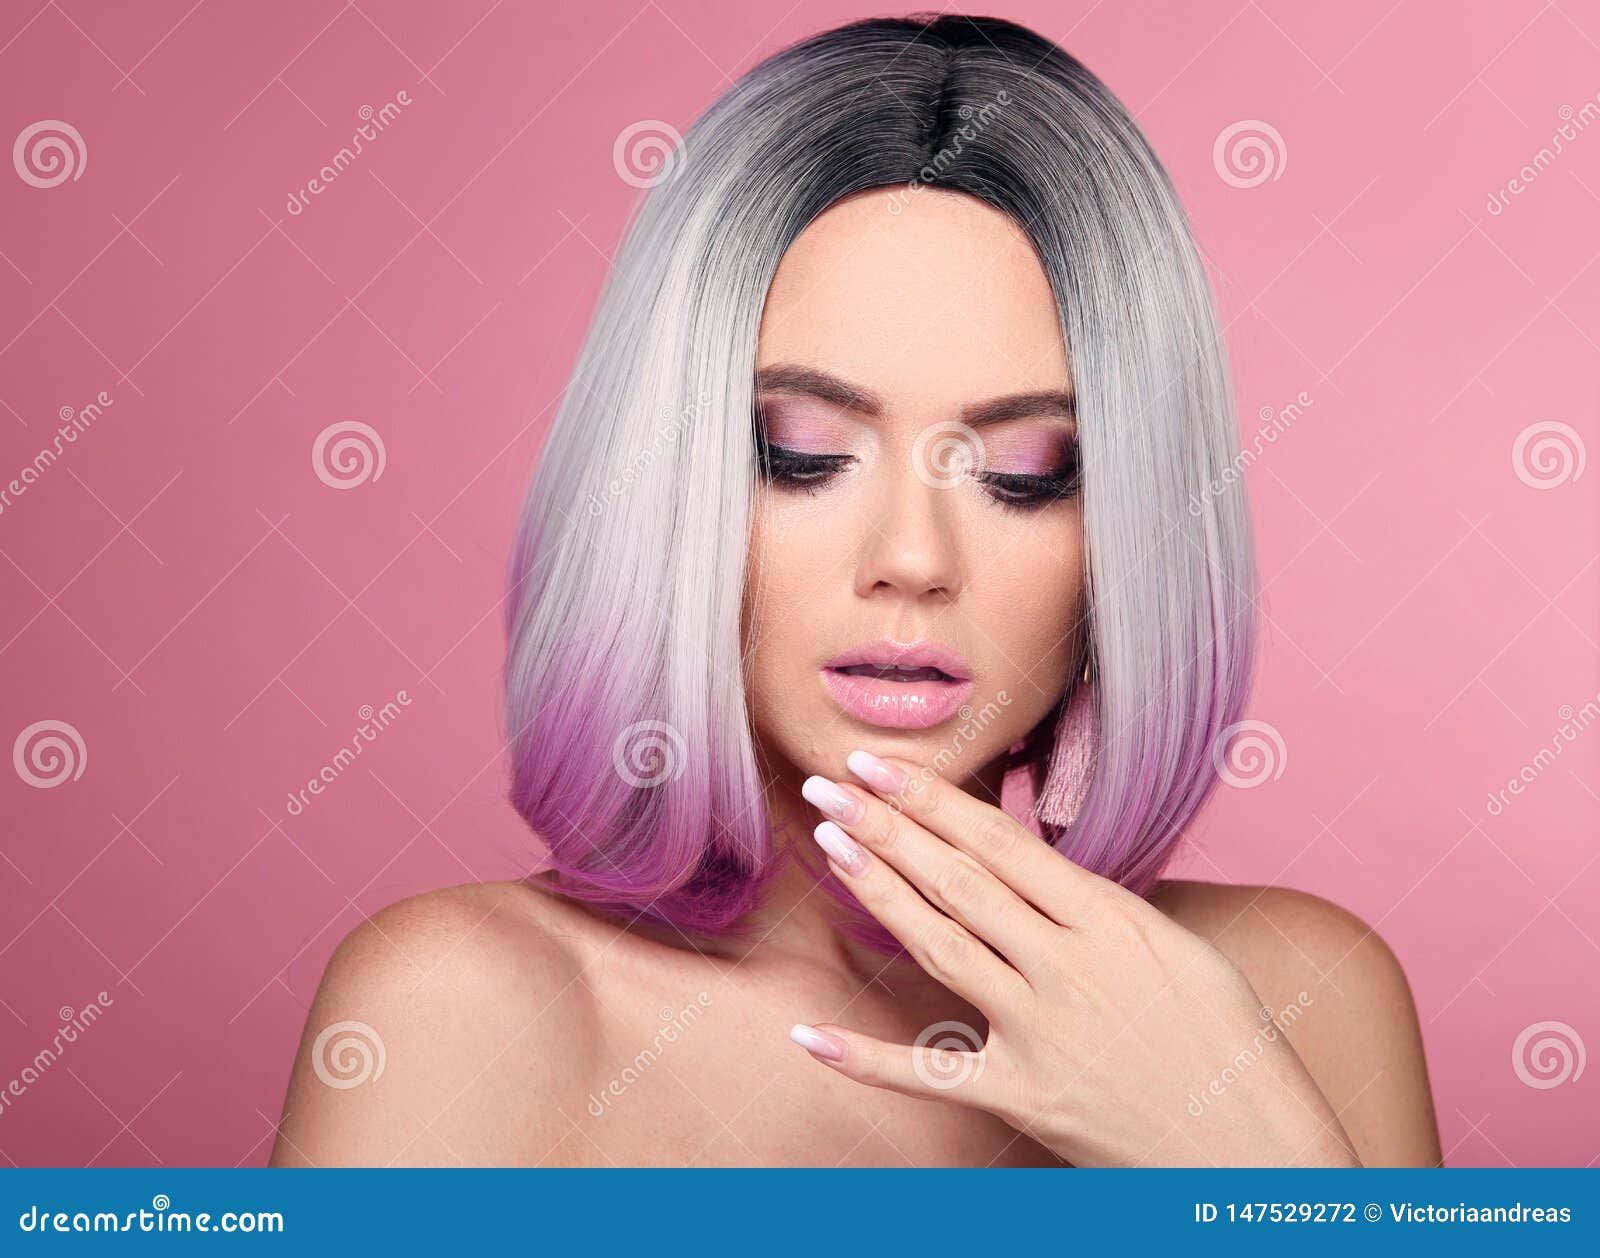 ombre bob short hairstyle and manicured nails. beauty makeup. beautiful hair coloring woman with wow face holding hand near her